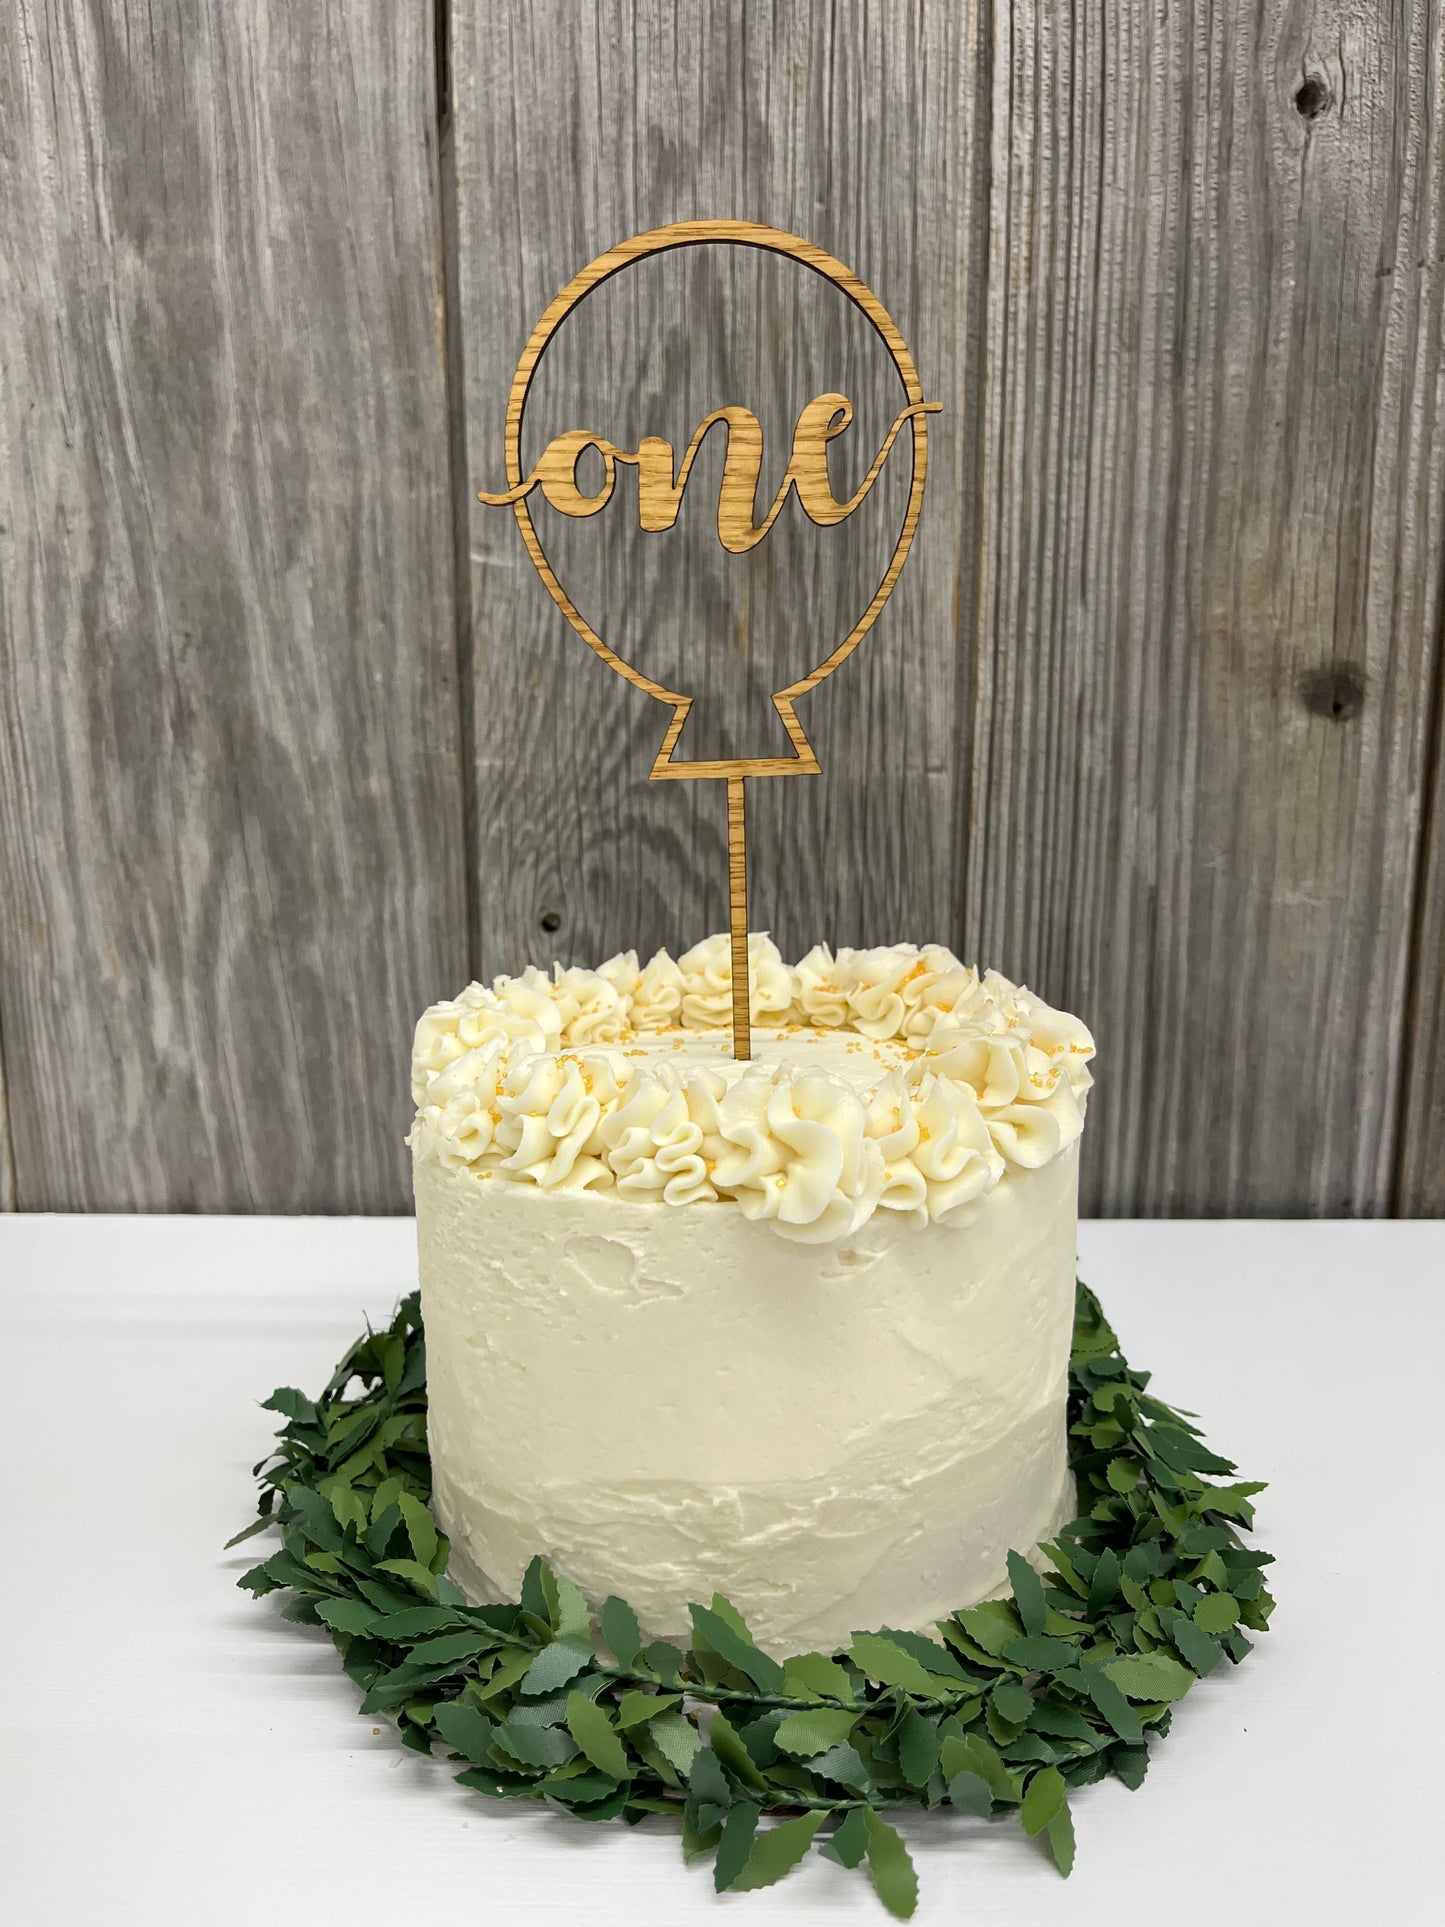 Personalized Cake Topper with Name